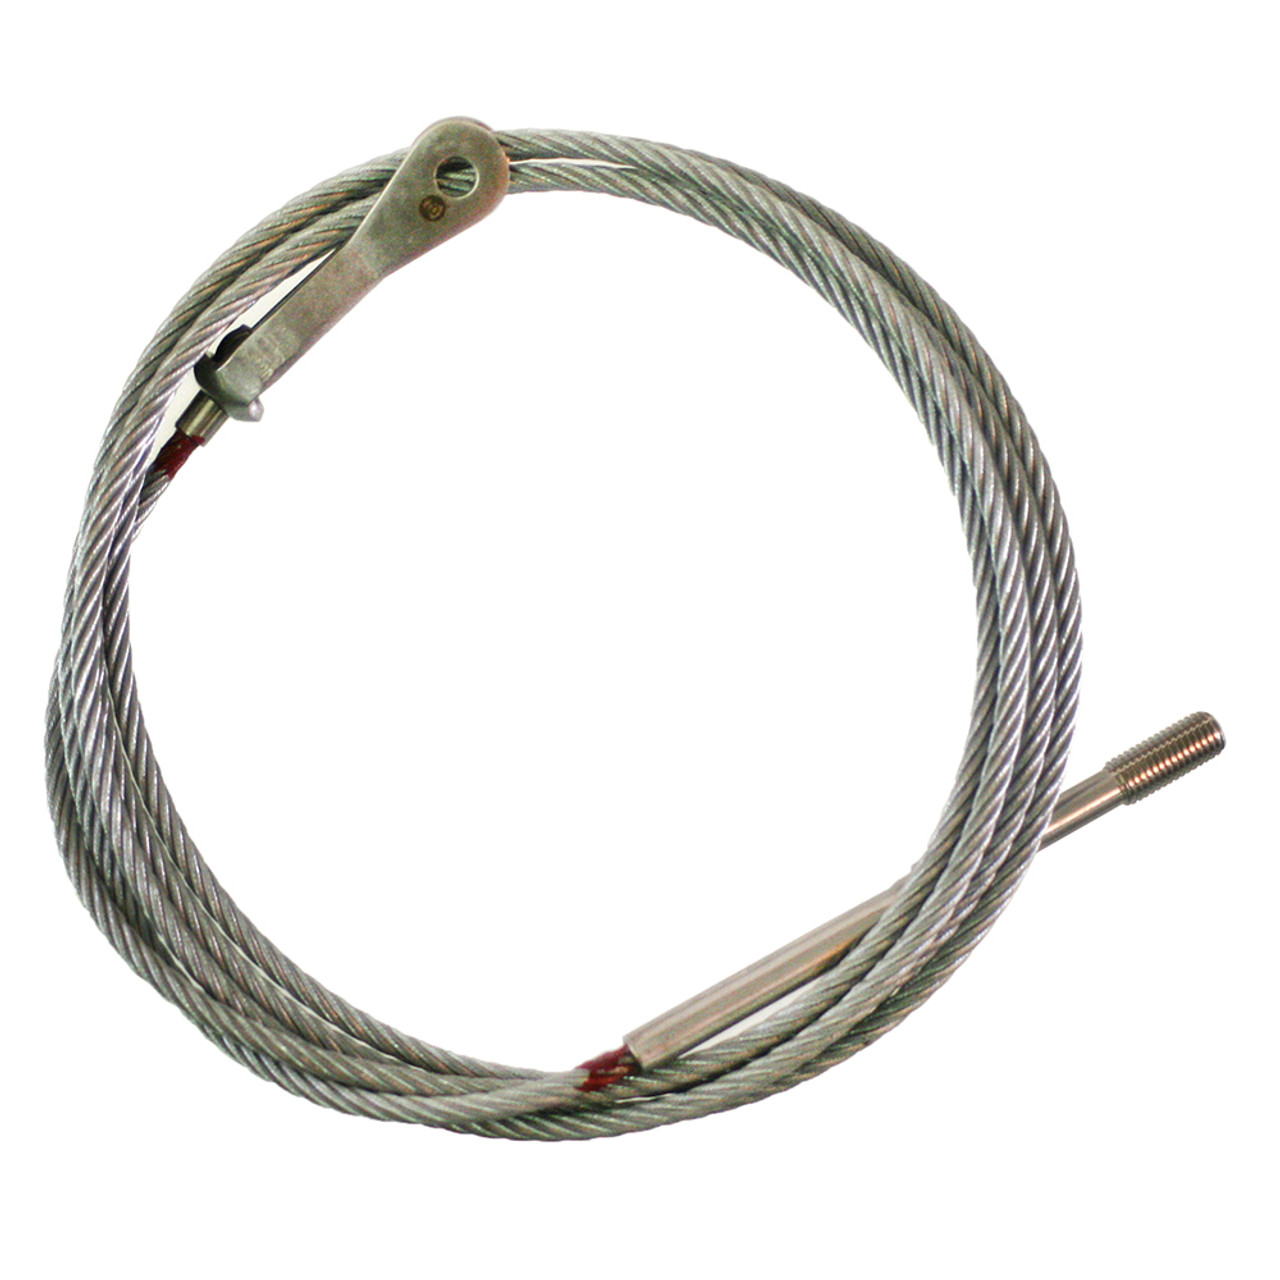 108-1141506S   STINSON WING FLAP CONTROL CABLE